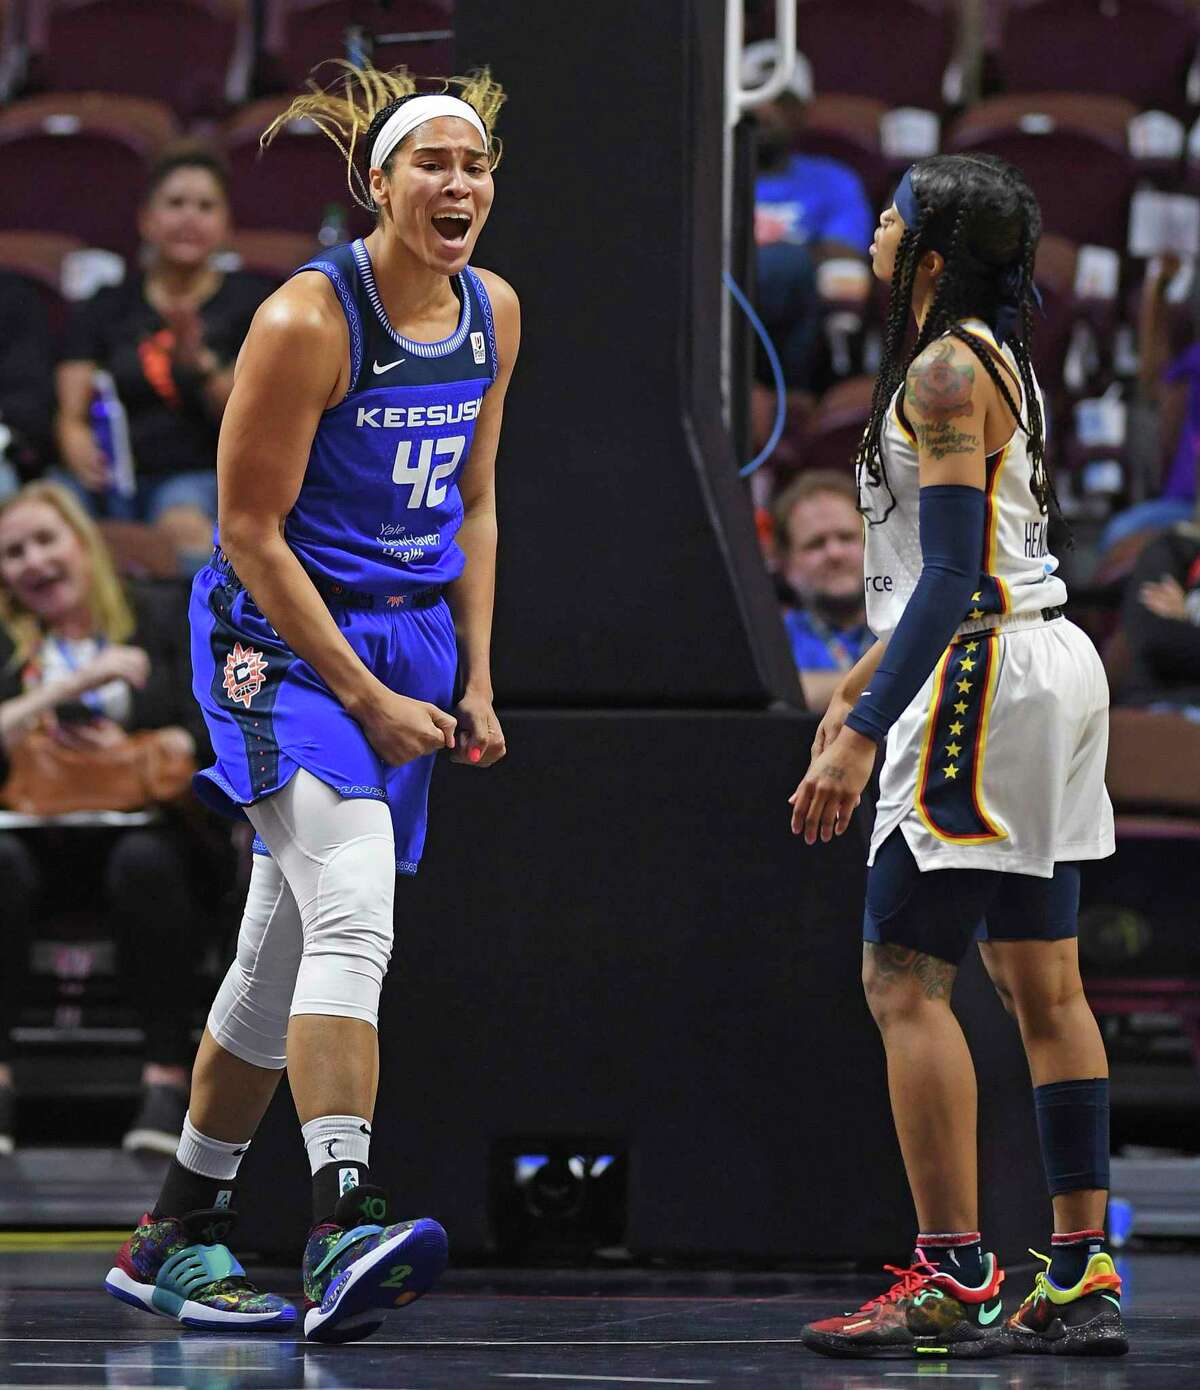 Connecticut Sun center Brionna Jones (42) celebrates after she was fouled while making a basket against the Indiana Fever, next to Fever guard Destanni Henderson (33) during a WNBA basketball game Friday, May 20, 2022, in Uncasville, Conn. (Sean D. Elliot/The Day via AP)